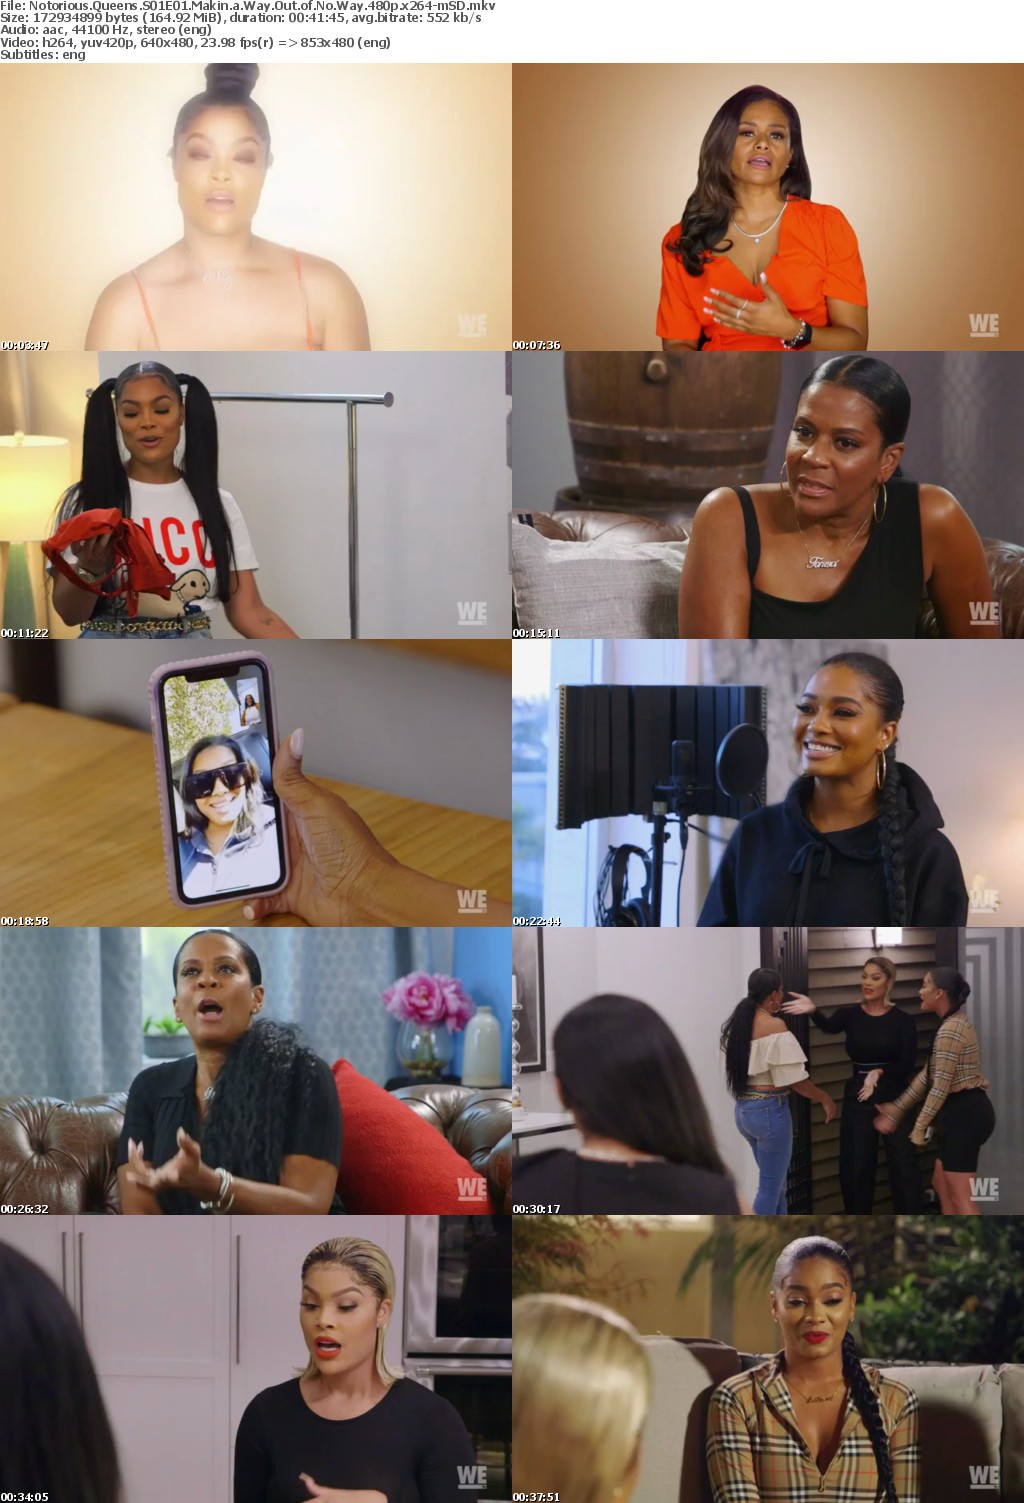 Notorious Queens S01E01 Makin a Way Out of No Way 480p x264-mSD